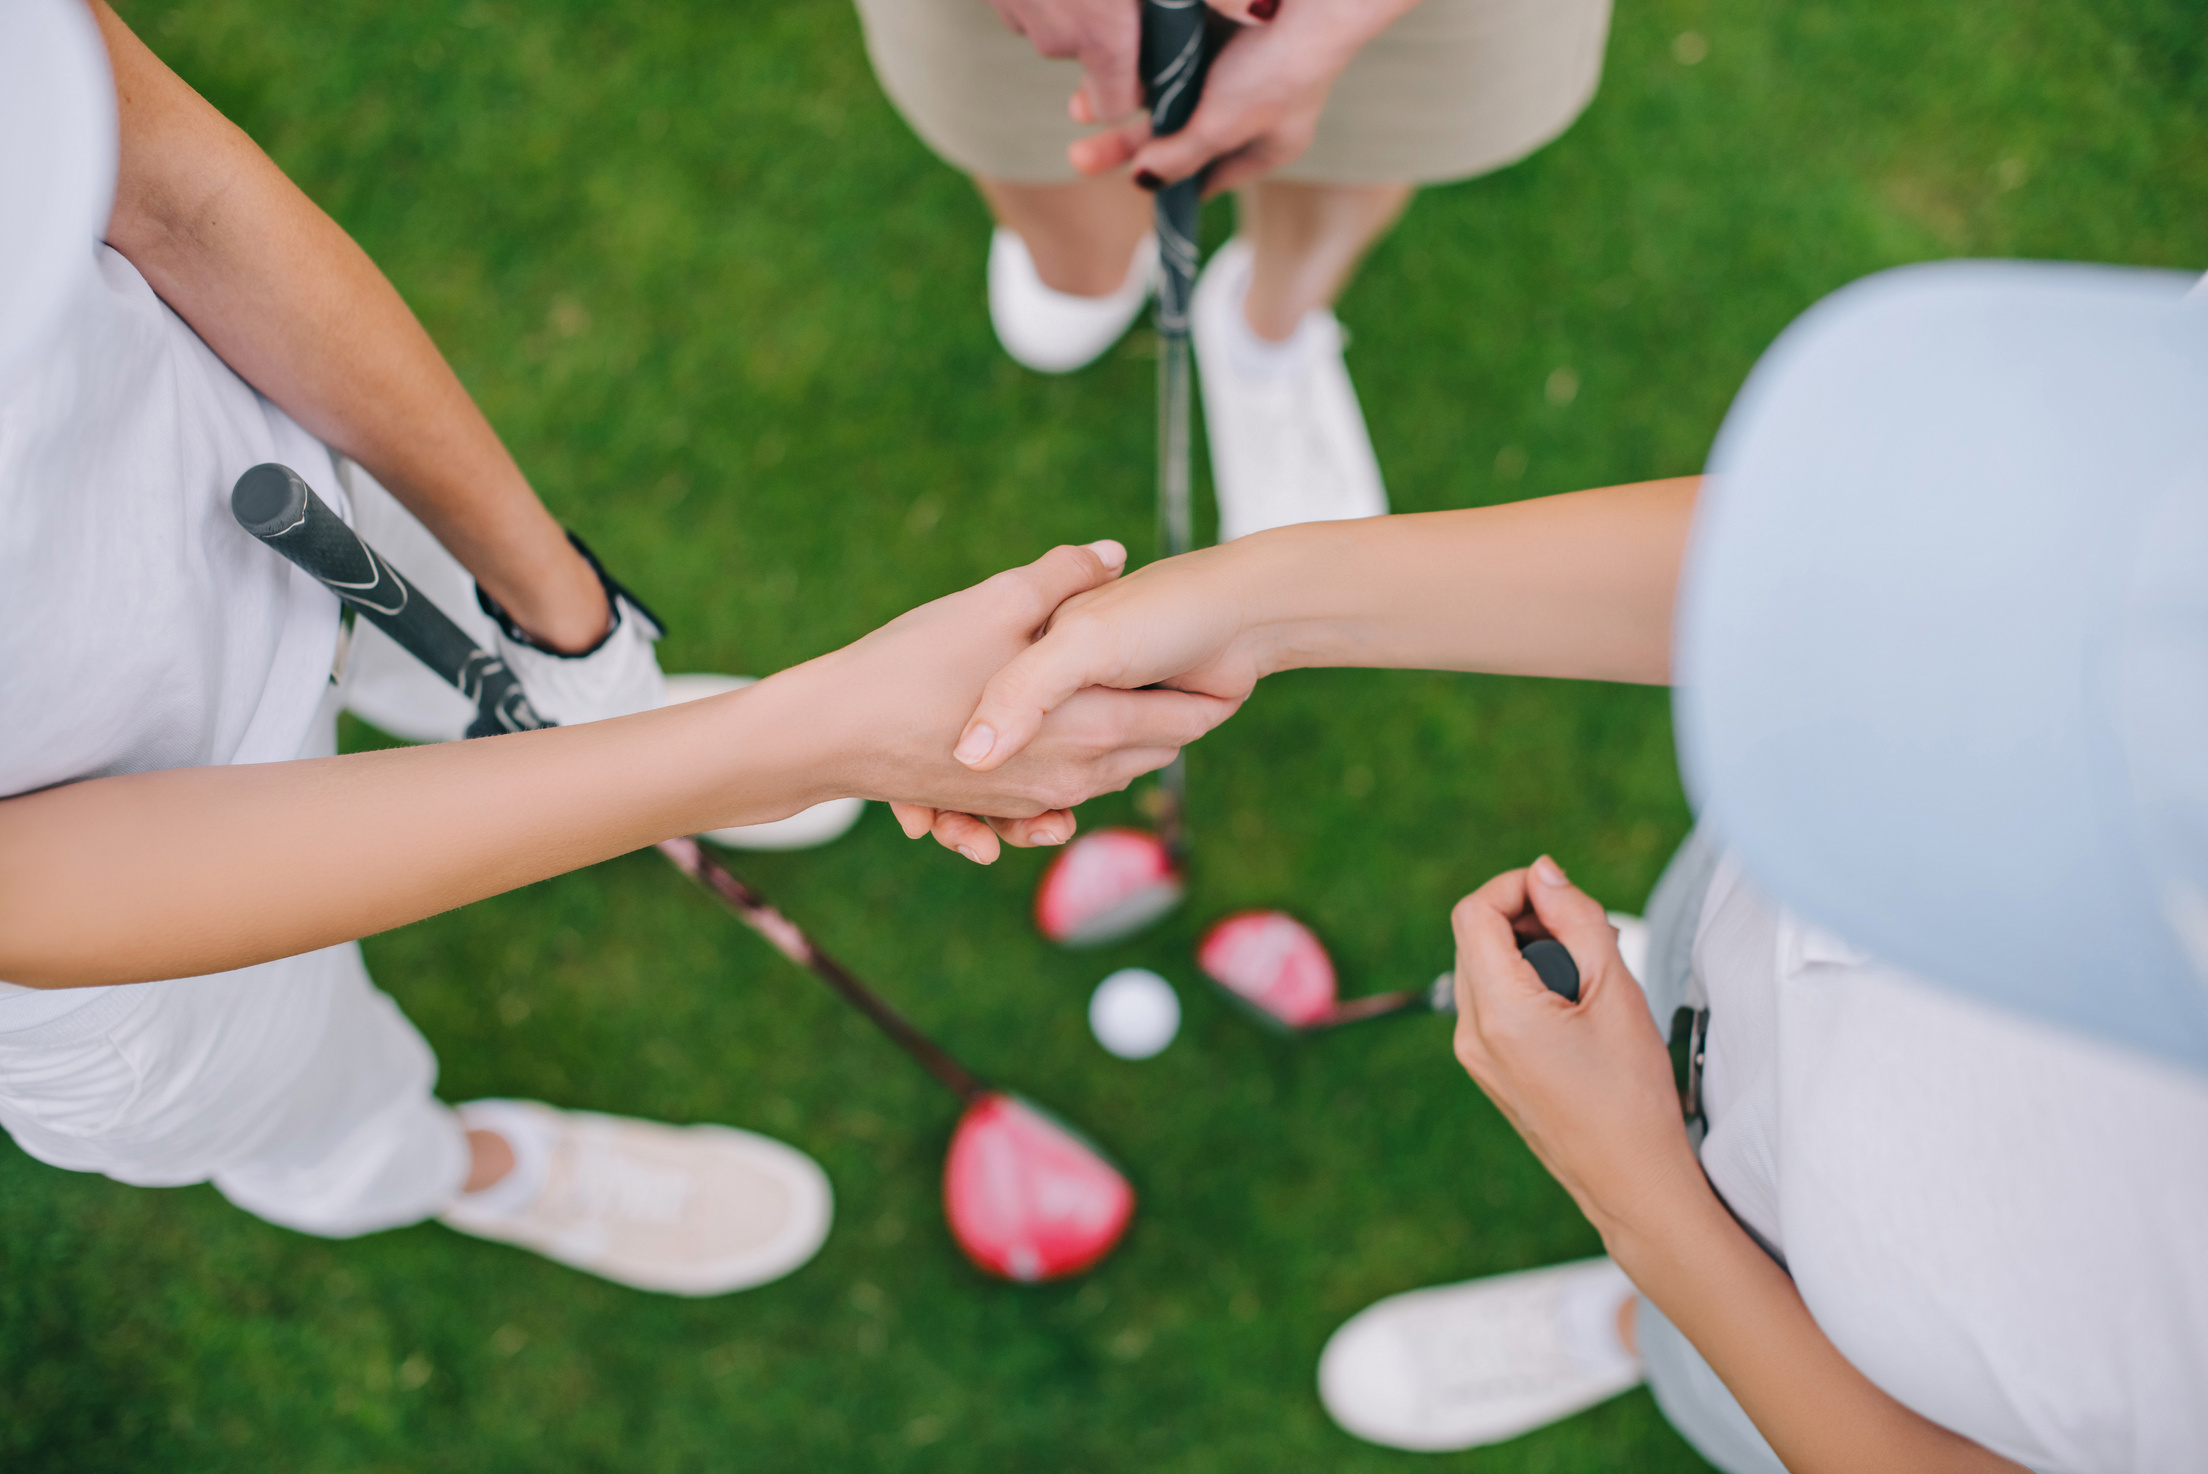 overhead view of female golf players with golf clubs shaking hands while standing on green lawn